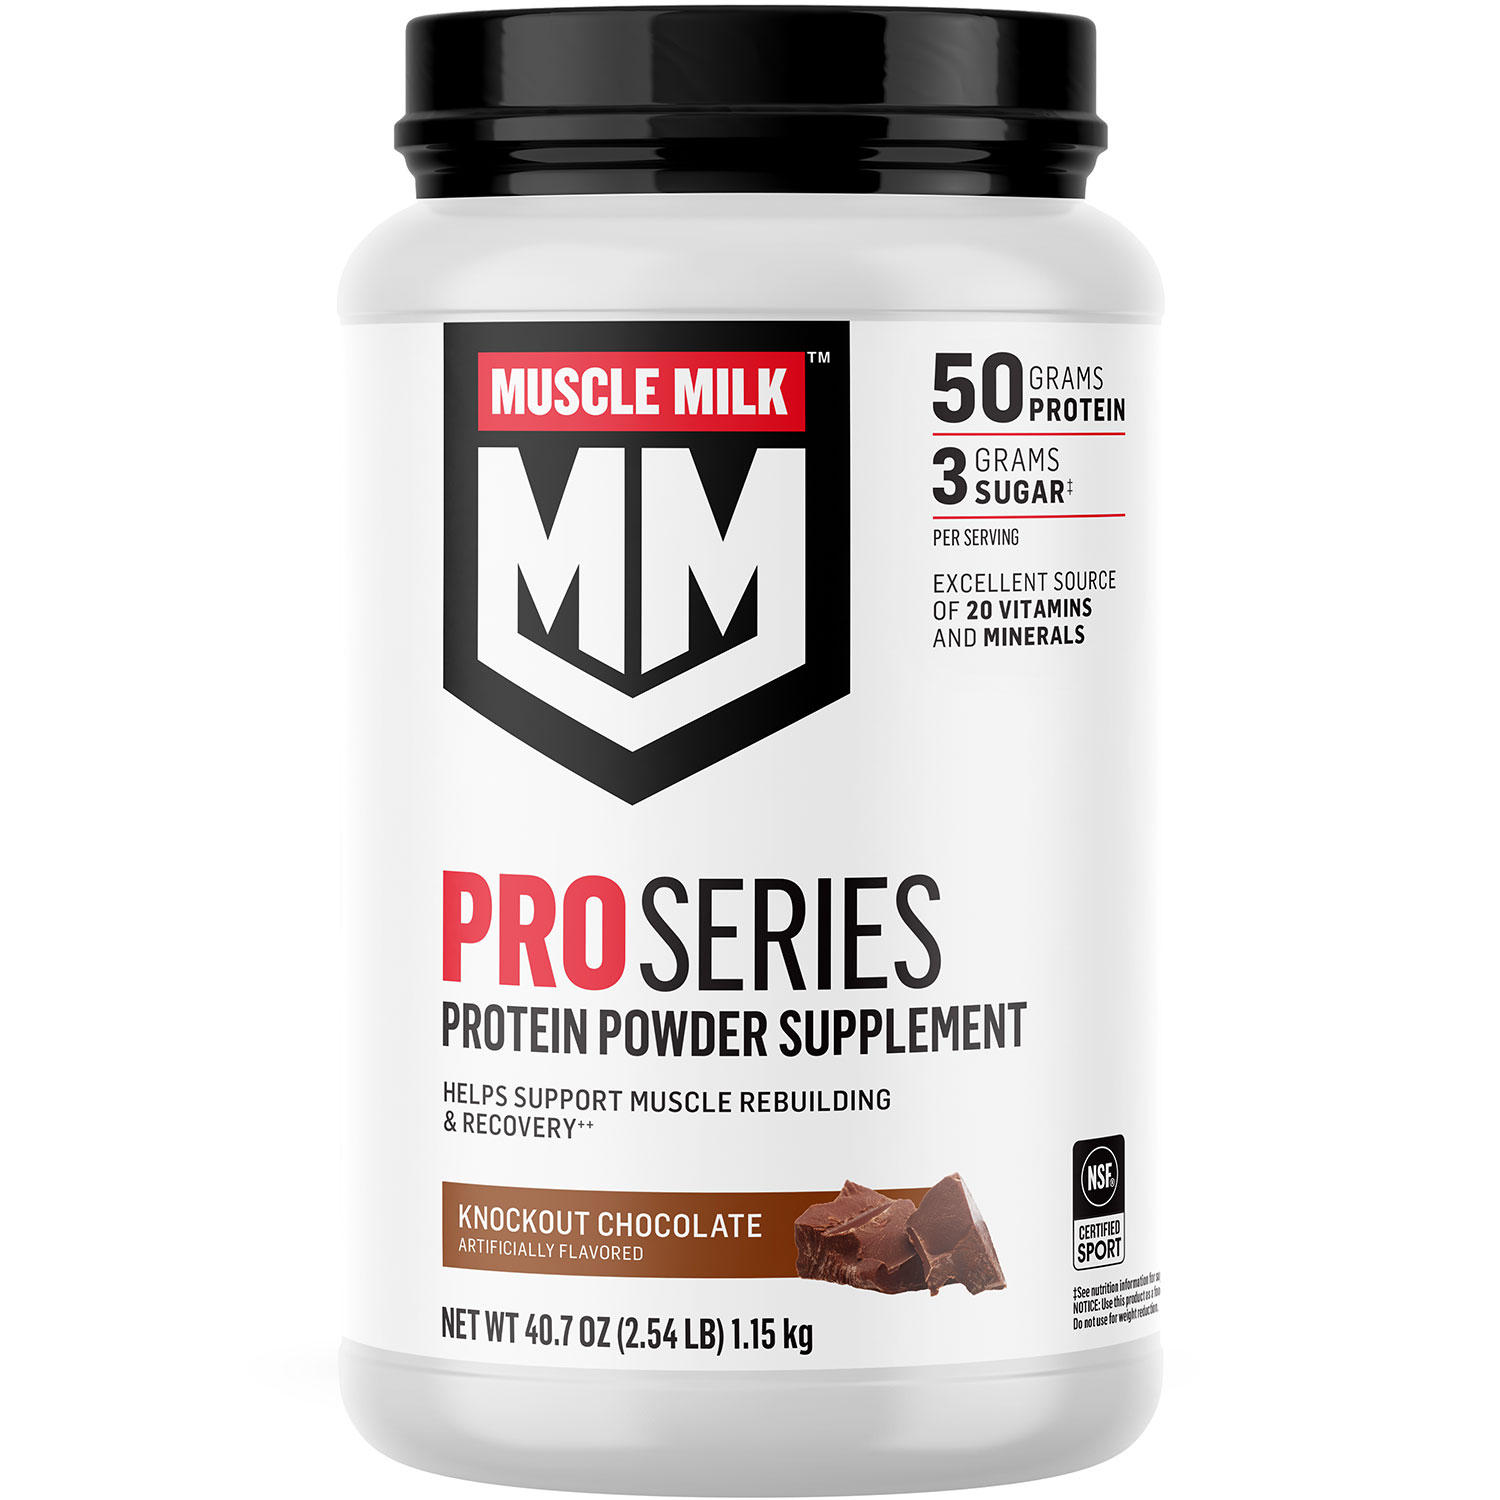 Muscle Milk Pro Series Protein Powder Supplement Knockout Chocolate (40.7 oz.)